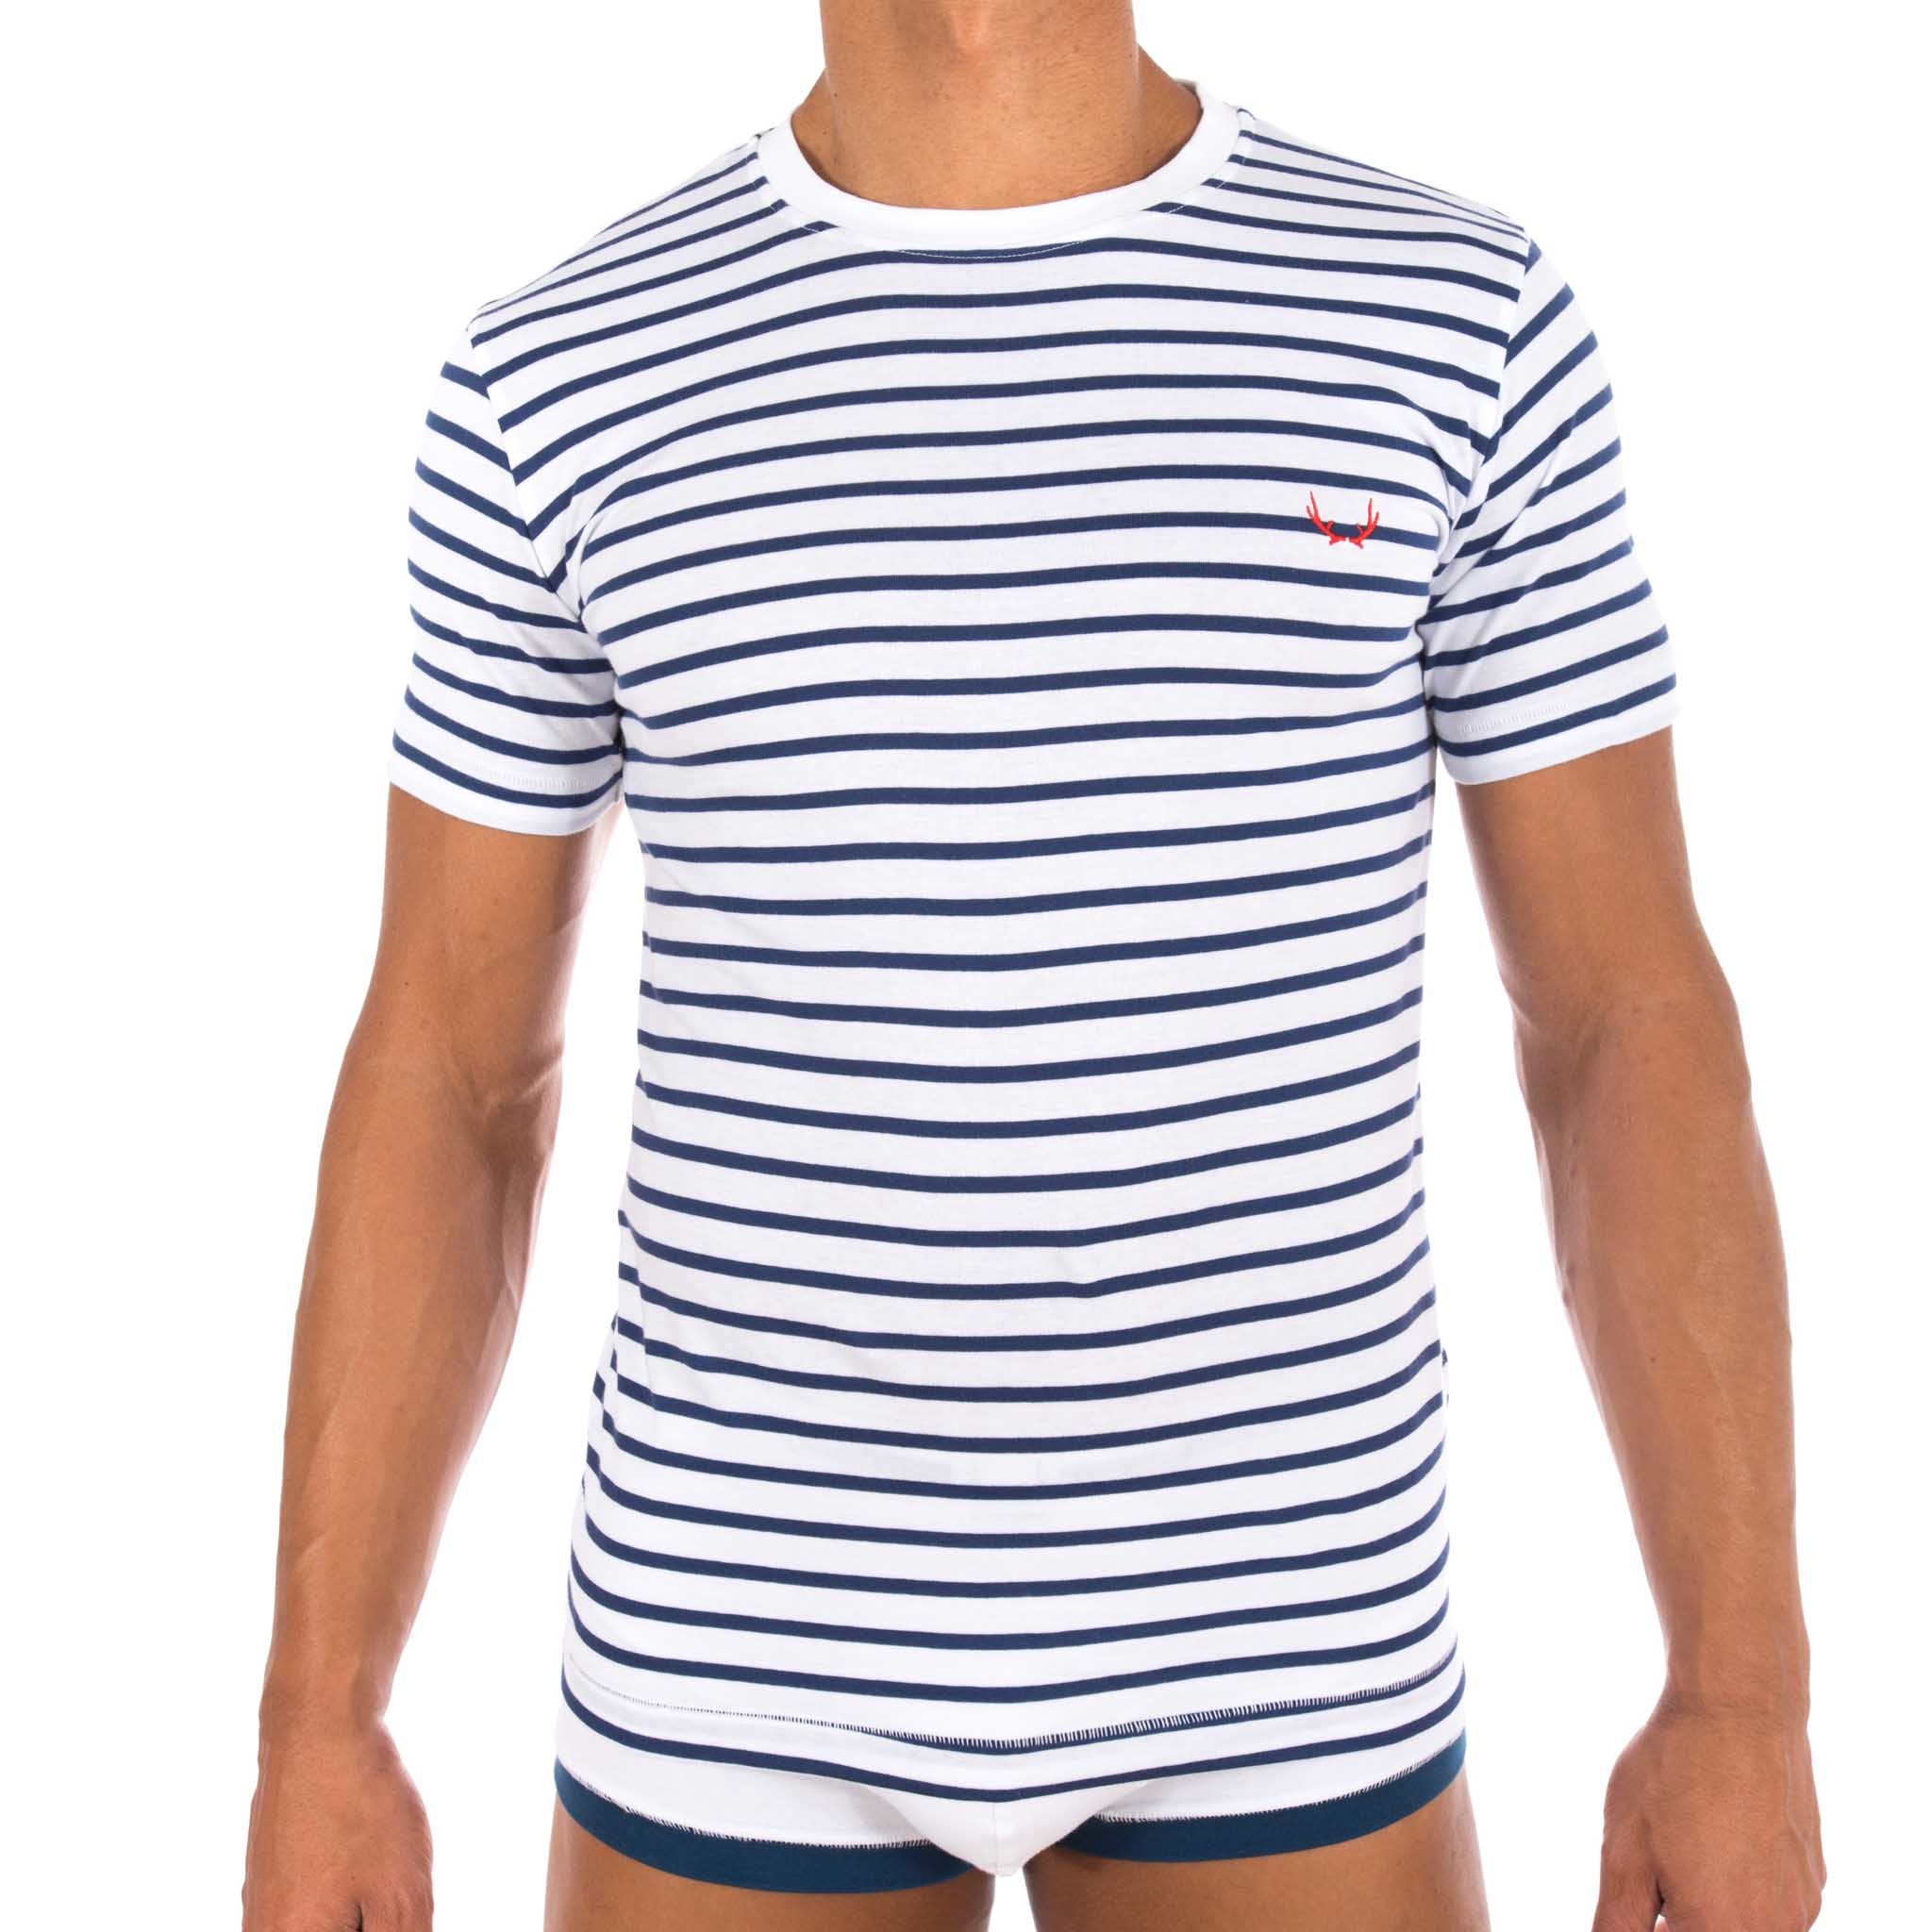 White and blue striped T-shirt made of organic cotton from Bluebuck